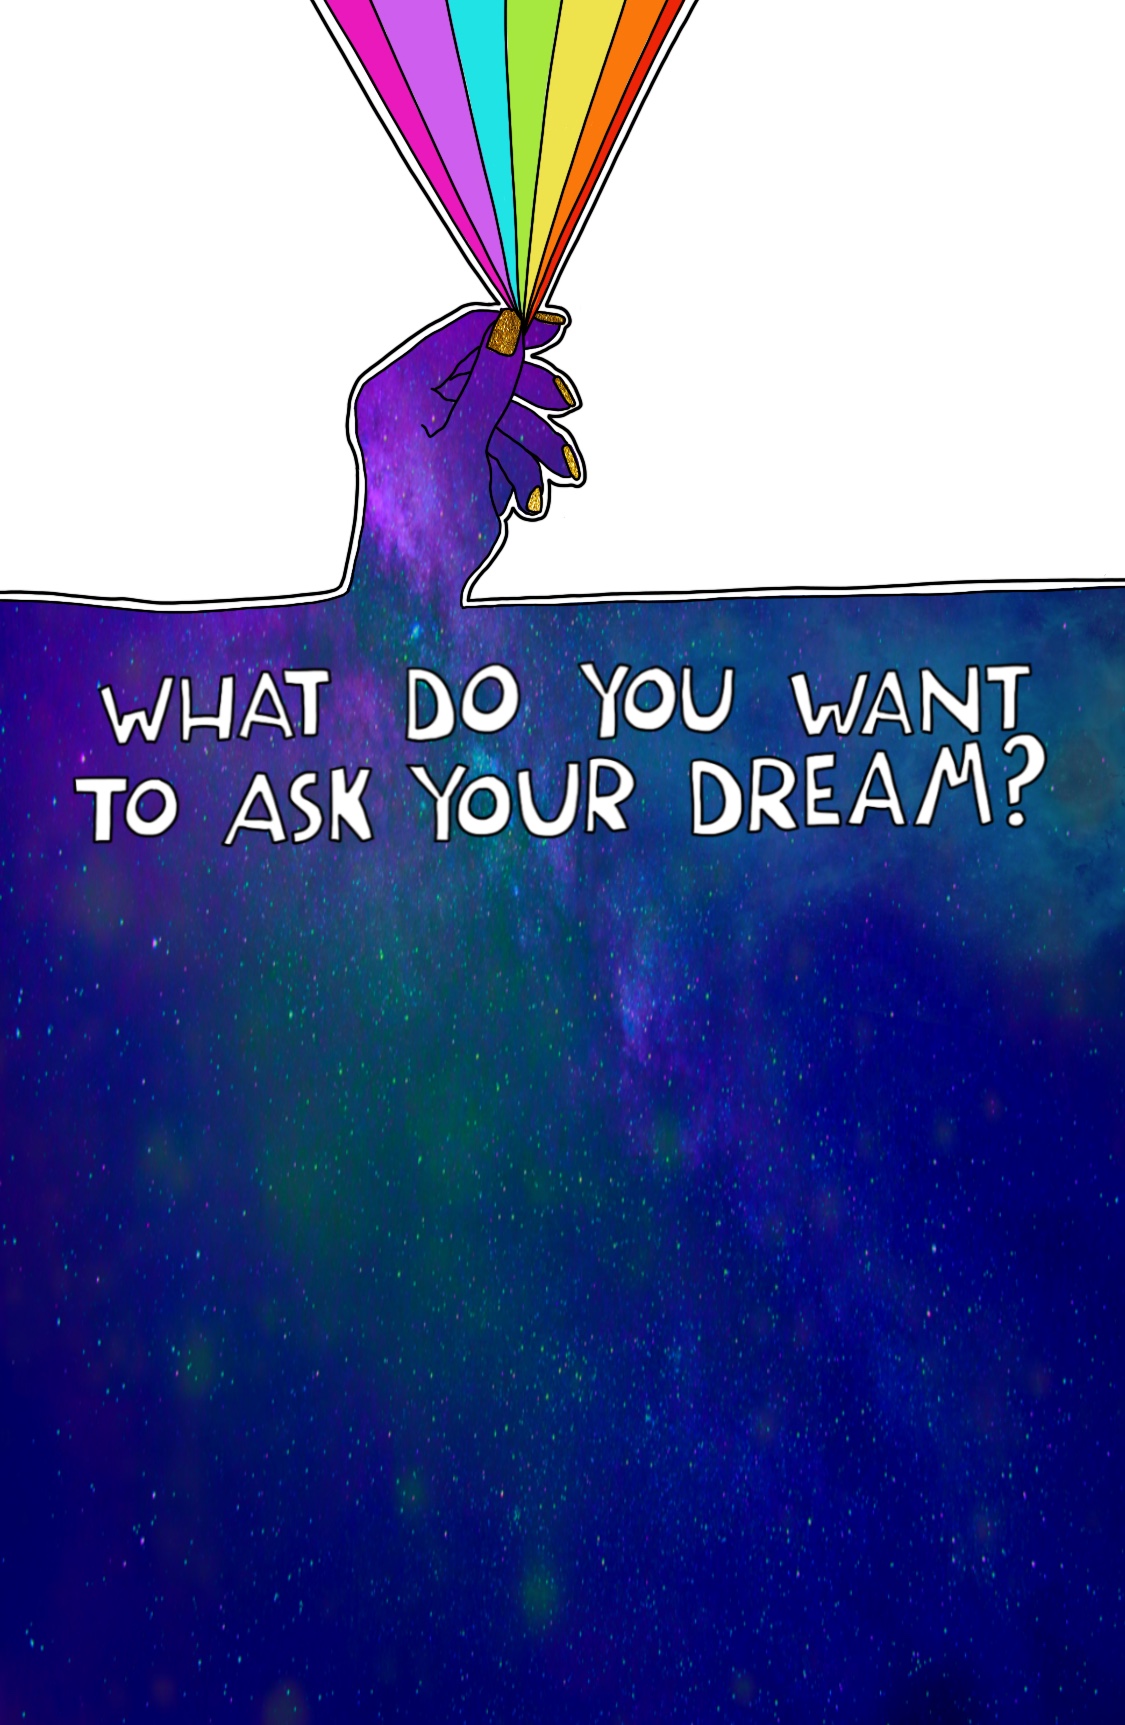 Journal Prompt: What do you want to ask your dream?